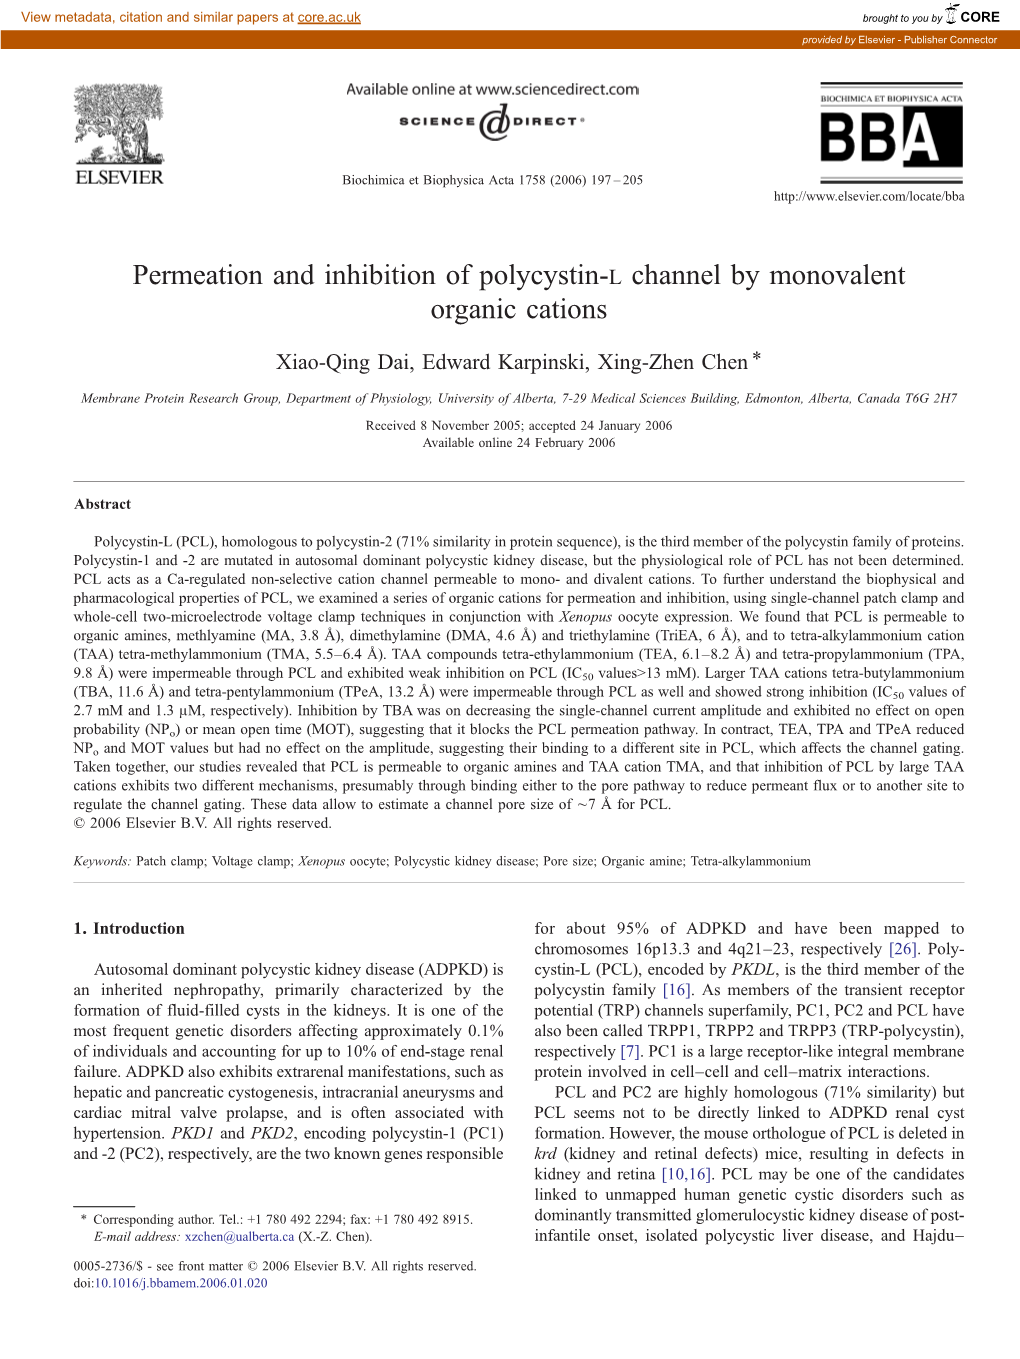 Permeation and Inhibition of Polycystin-L Channel by Monovalent Organic Cations ⁎ Xiao-Qing Dai, Edward Karpinski, Xing-Zhen Chen